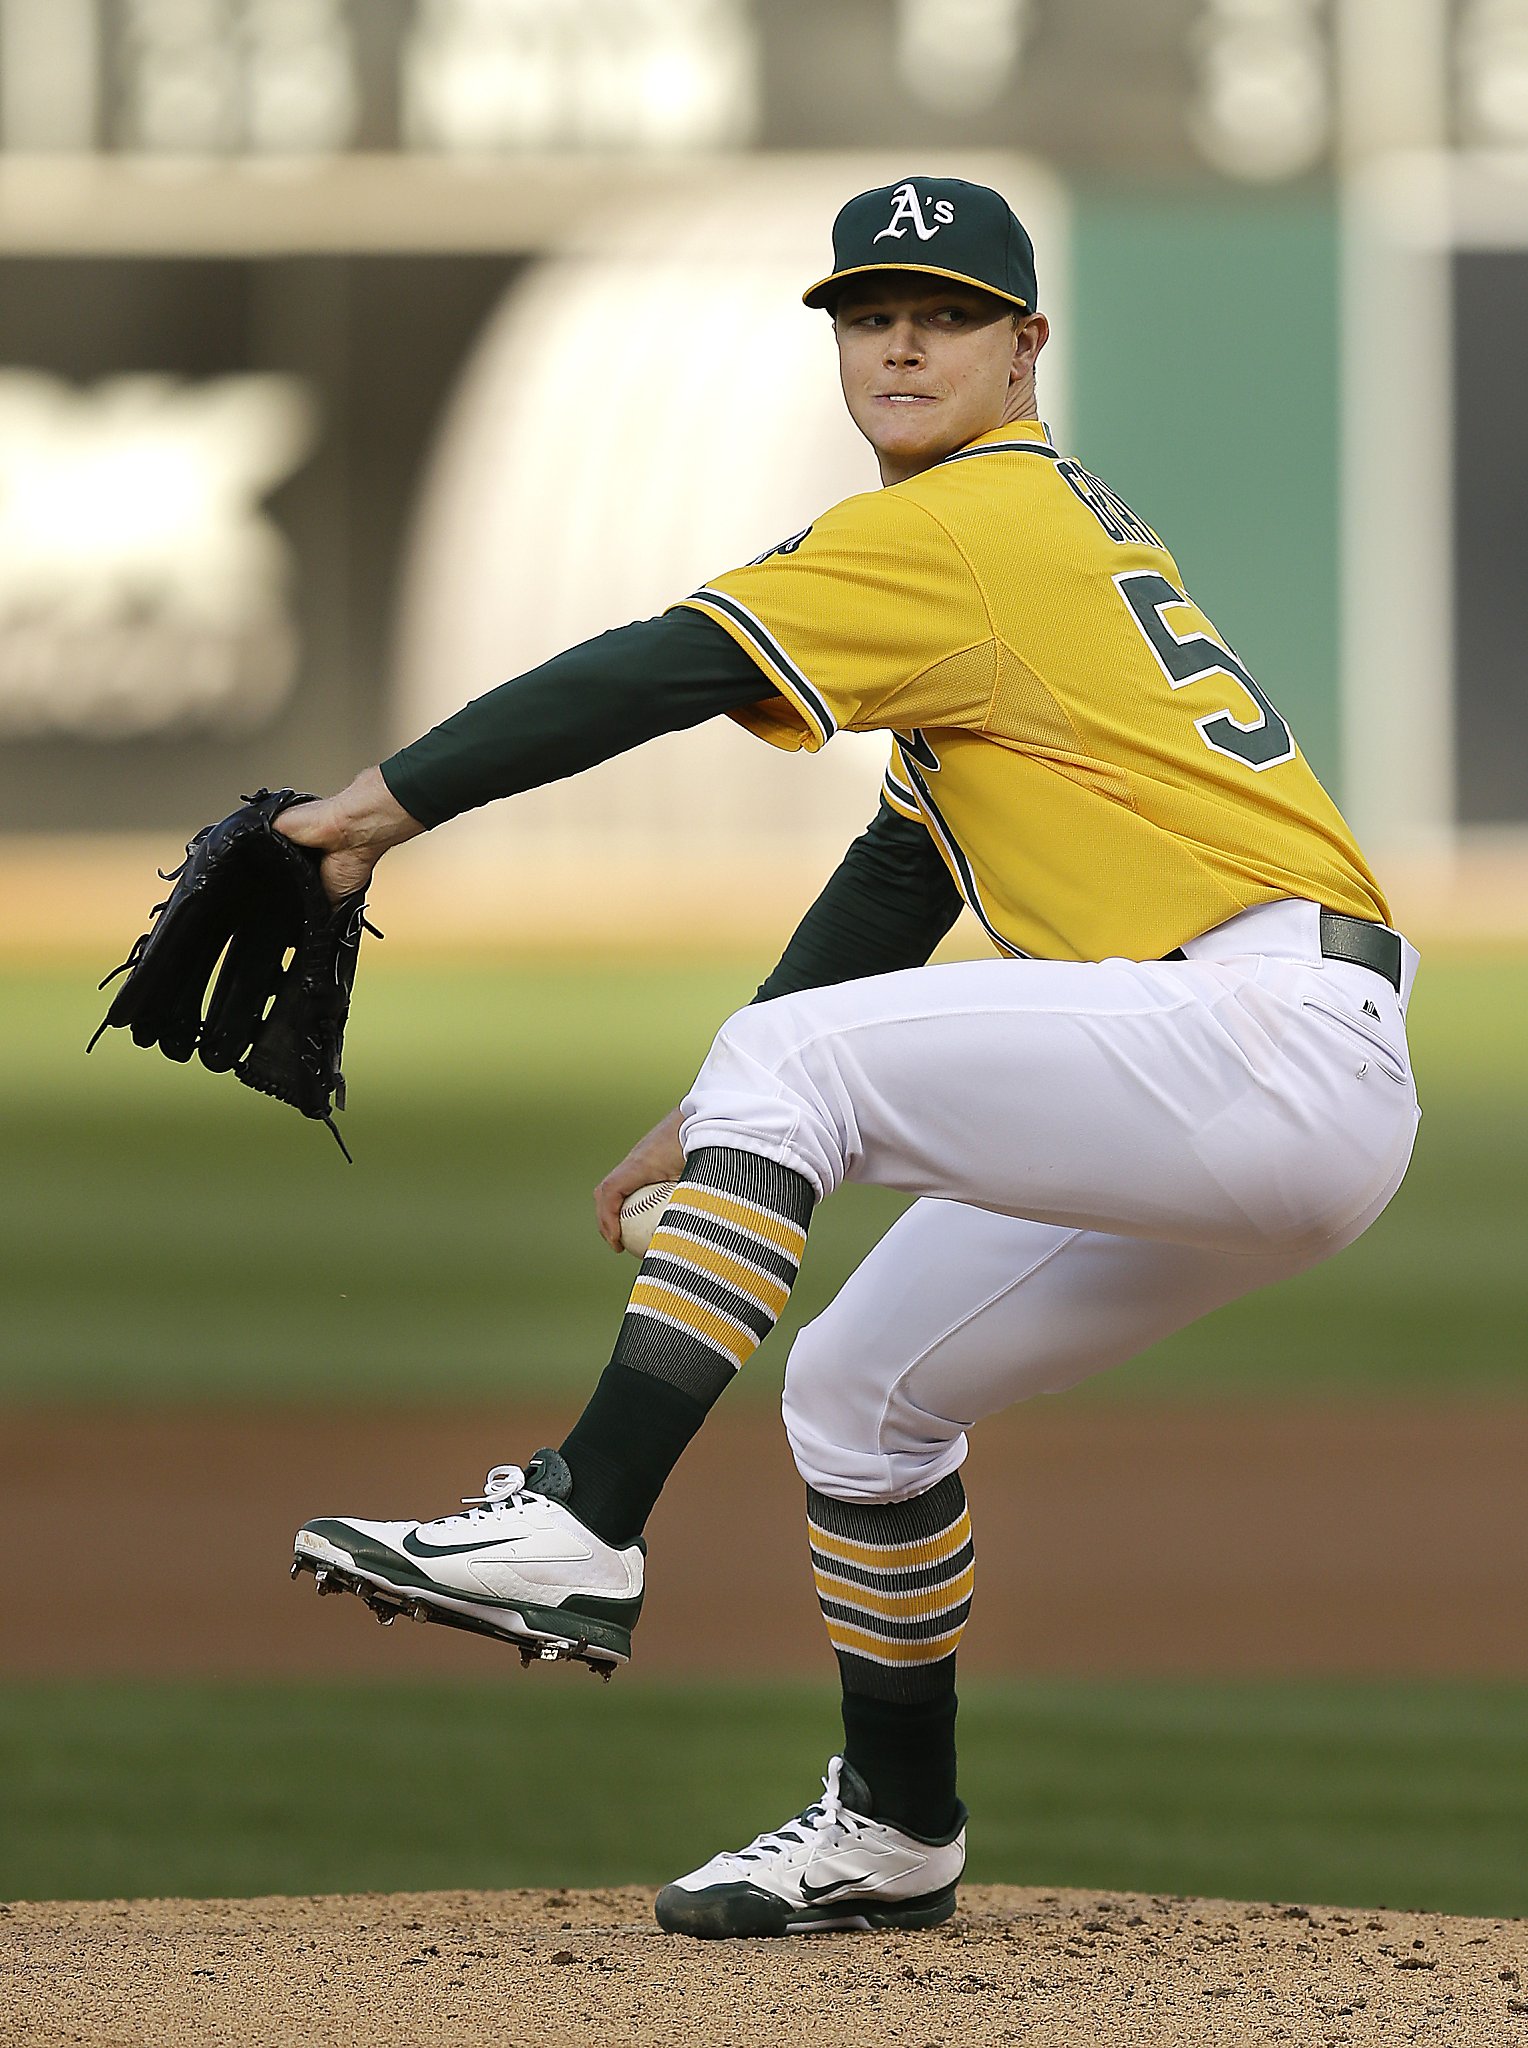 Sonny Gray helps A’s tame Yankees 6-2 - SFGate1528 x 2048